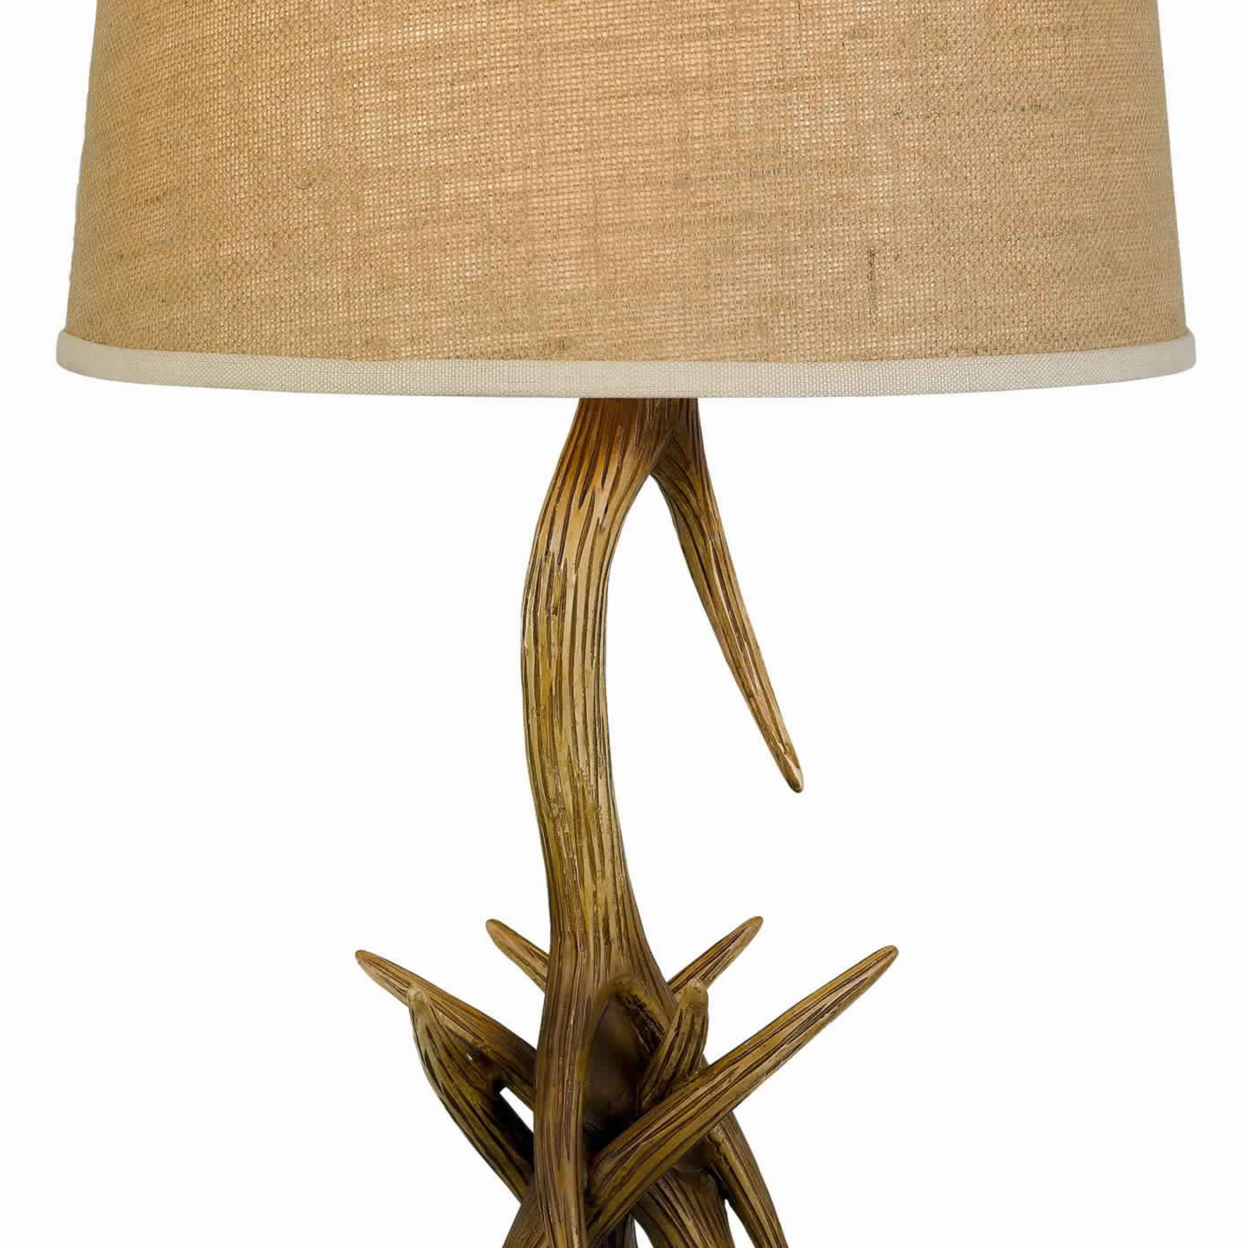 Textured Fabric Shade Table Lamp With Antler Design Base, Beige And Brown- Saltoro Sherpi